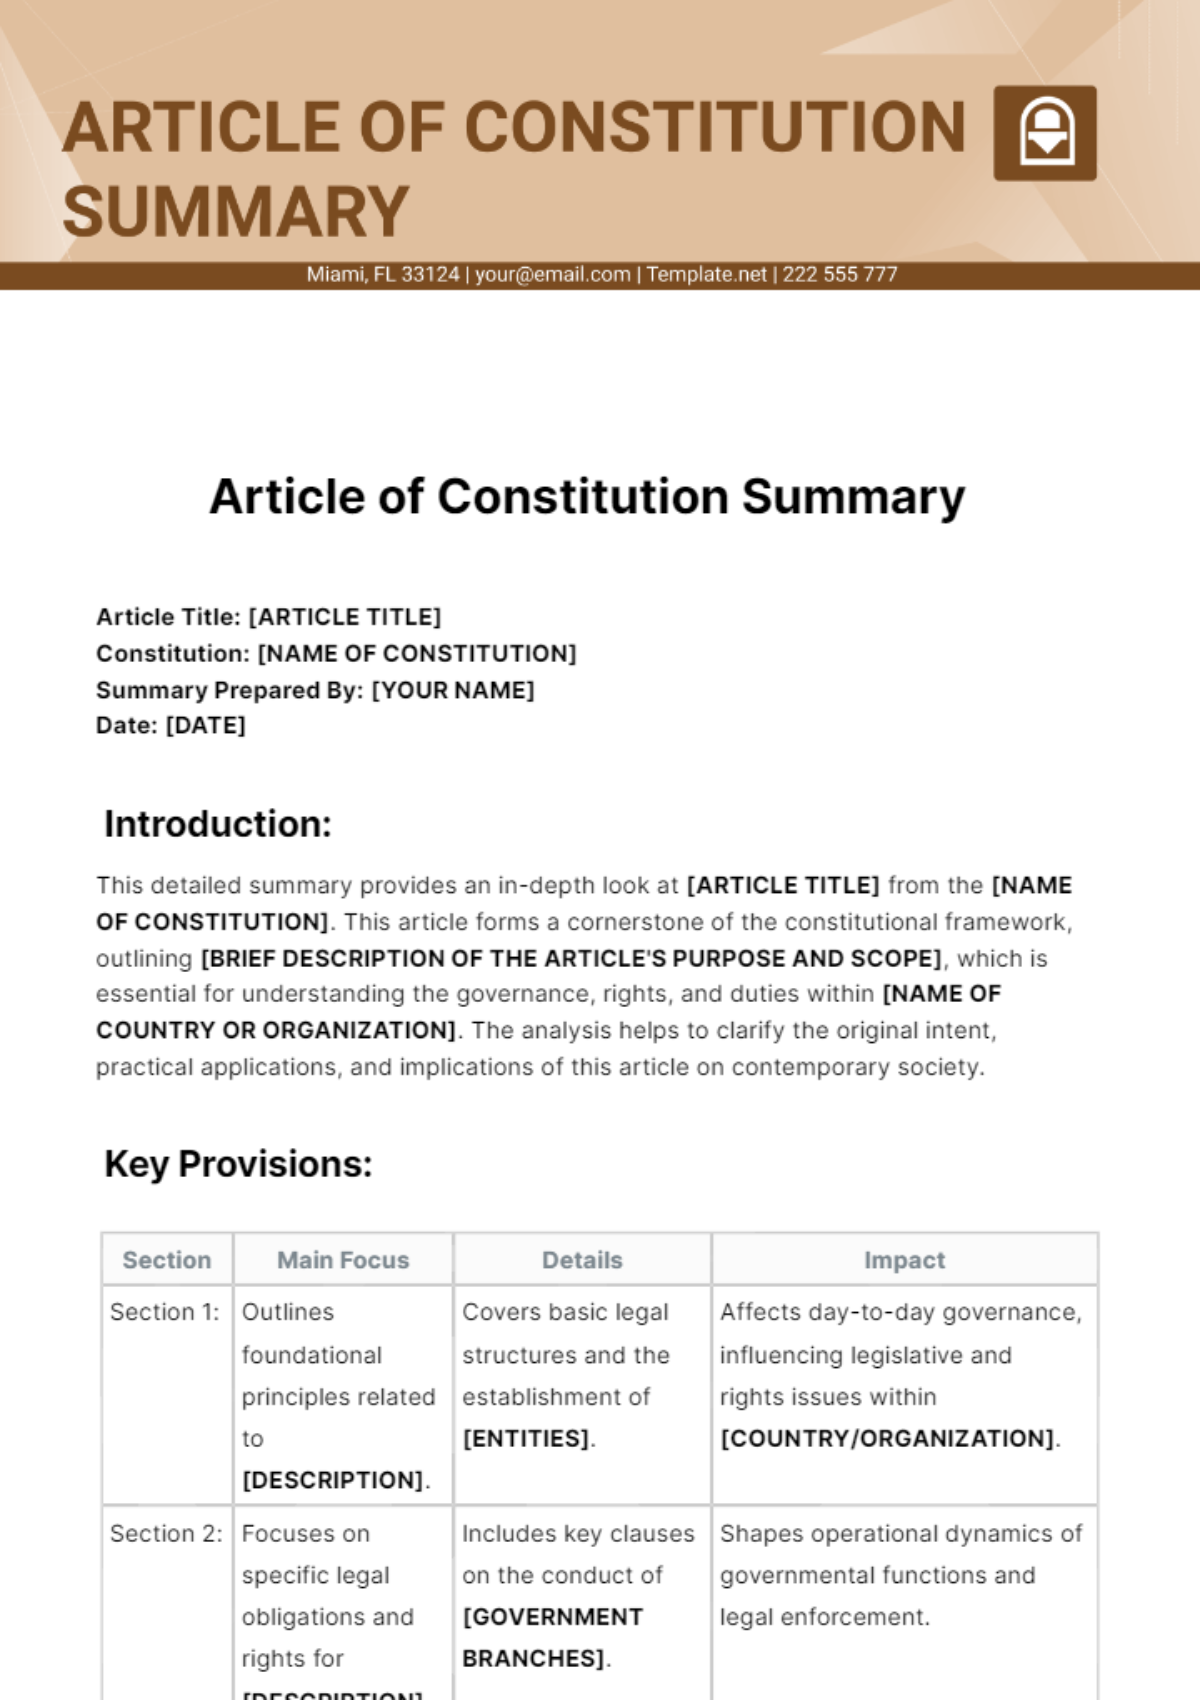 Free Article of Constitution Summary Template